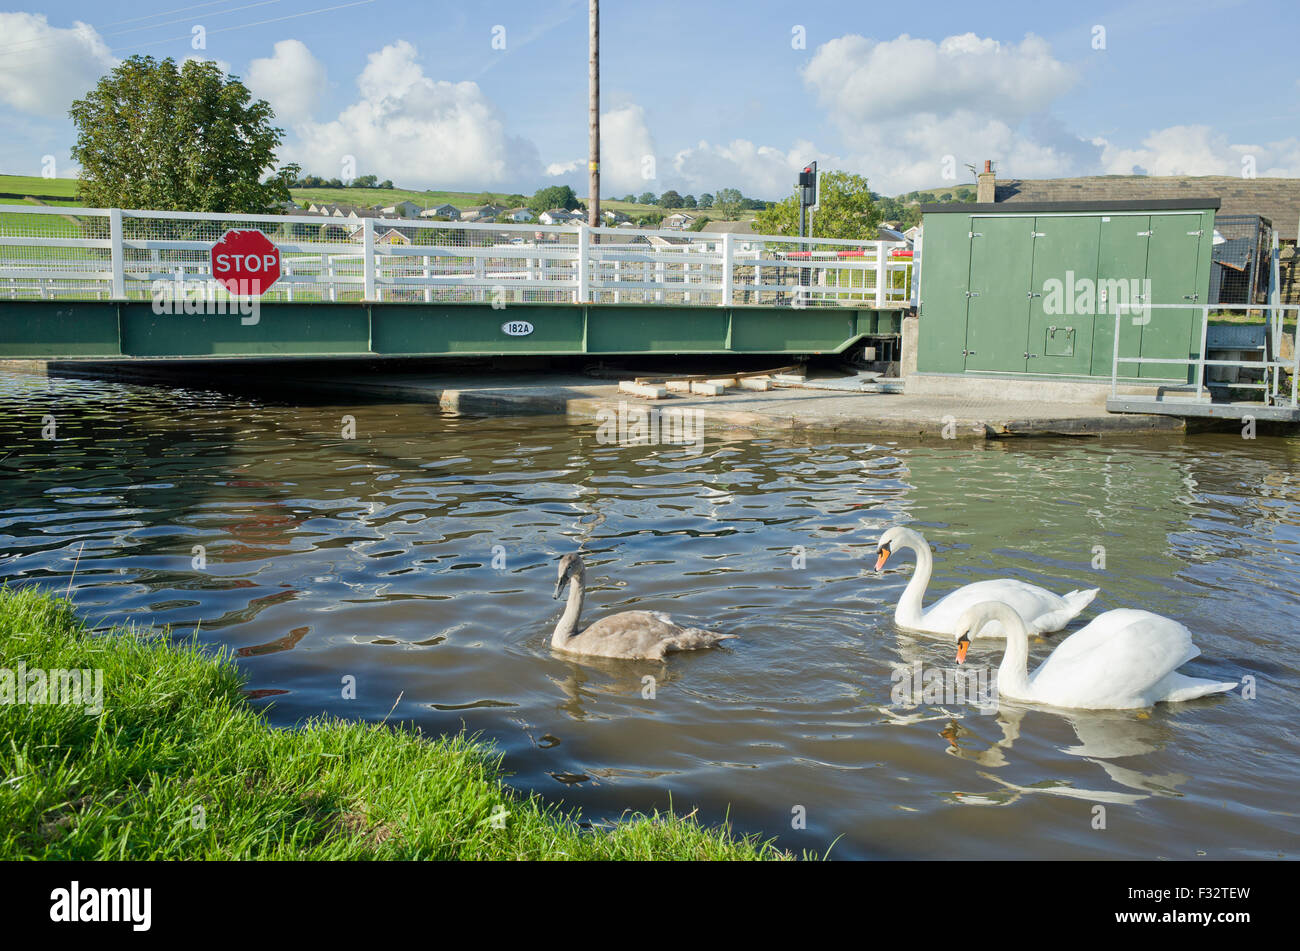 Family of swans swimming near a canal road bridge. Stock Photo